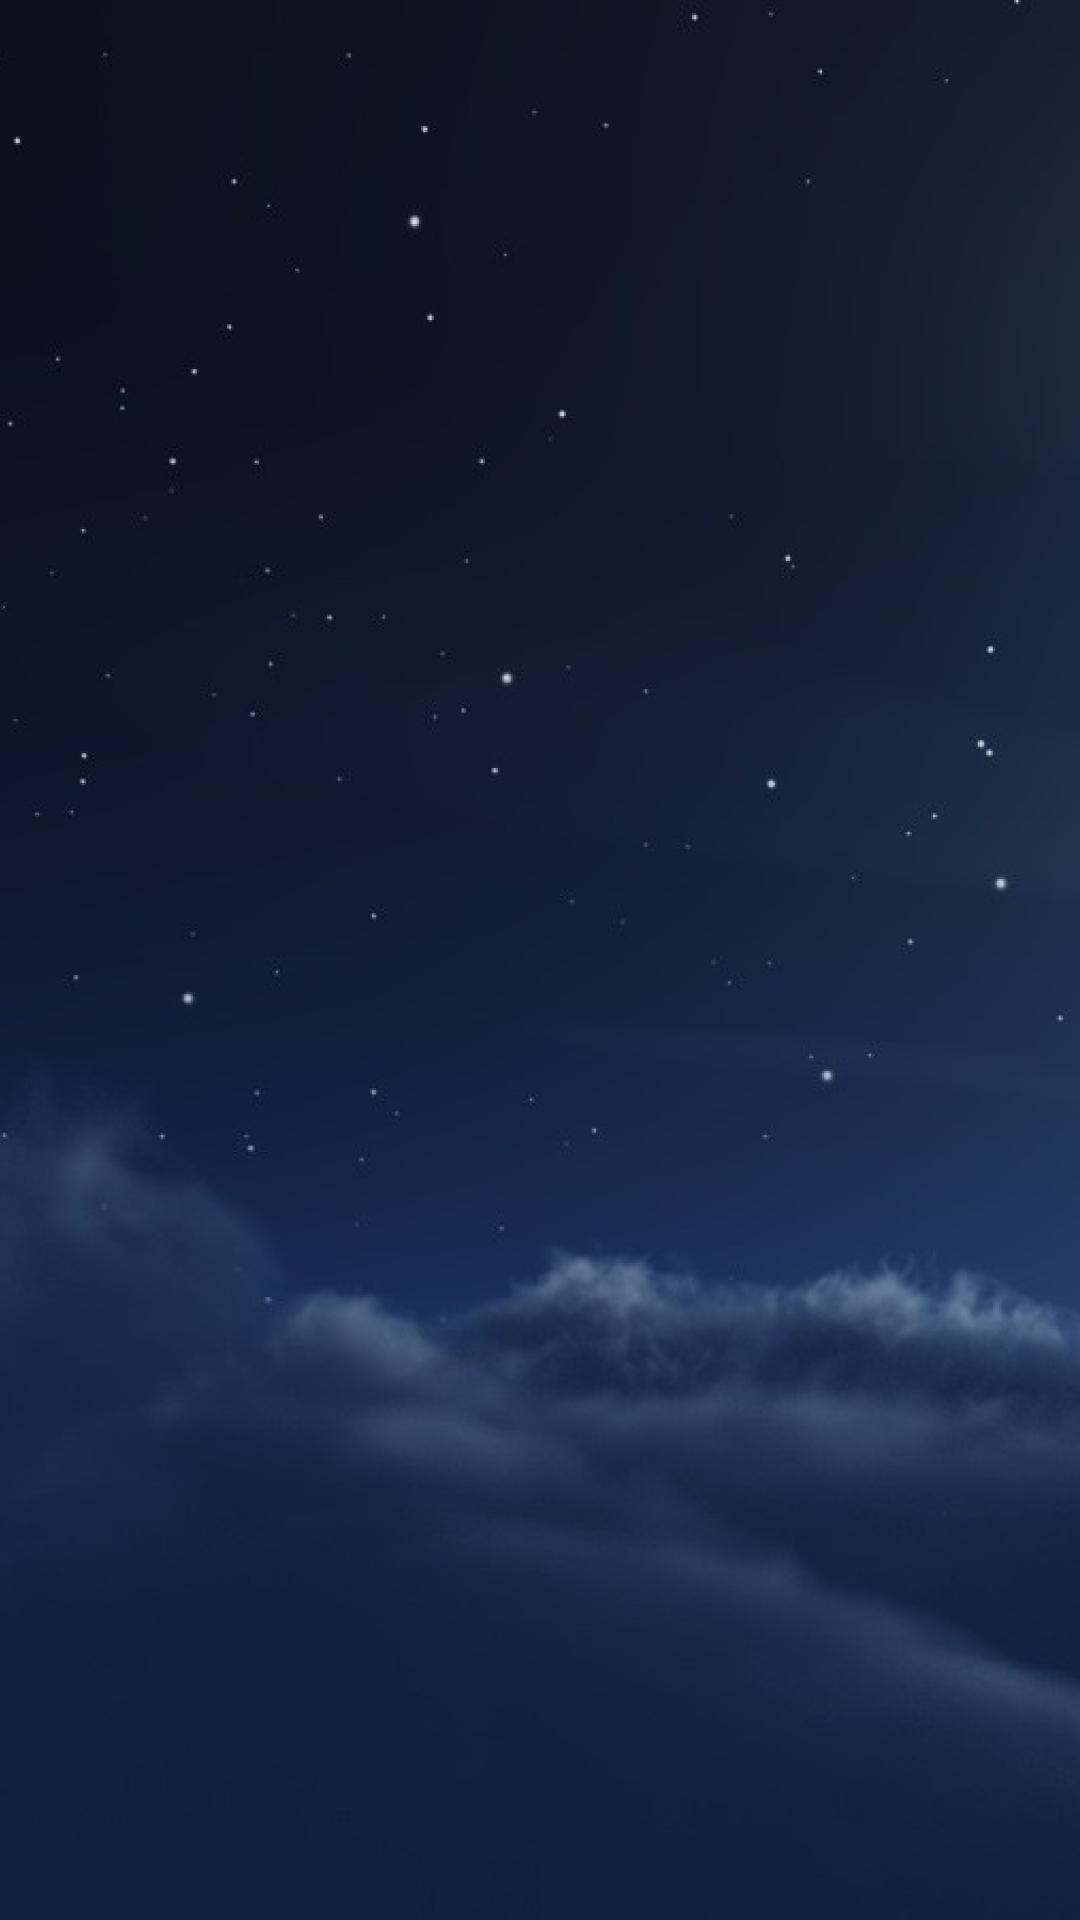 ScreenHeaven: Moon clouds night sky desktop and mobile background